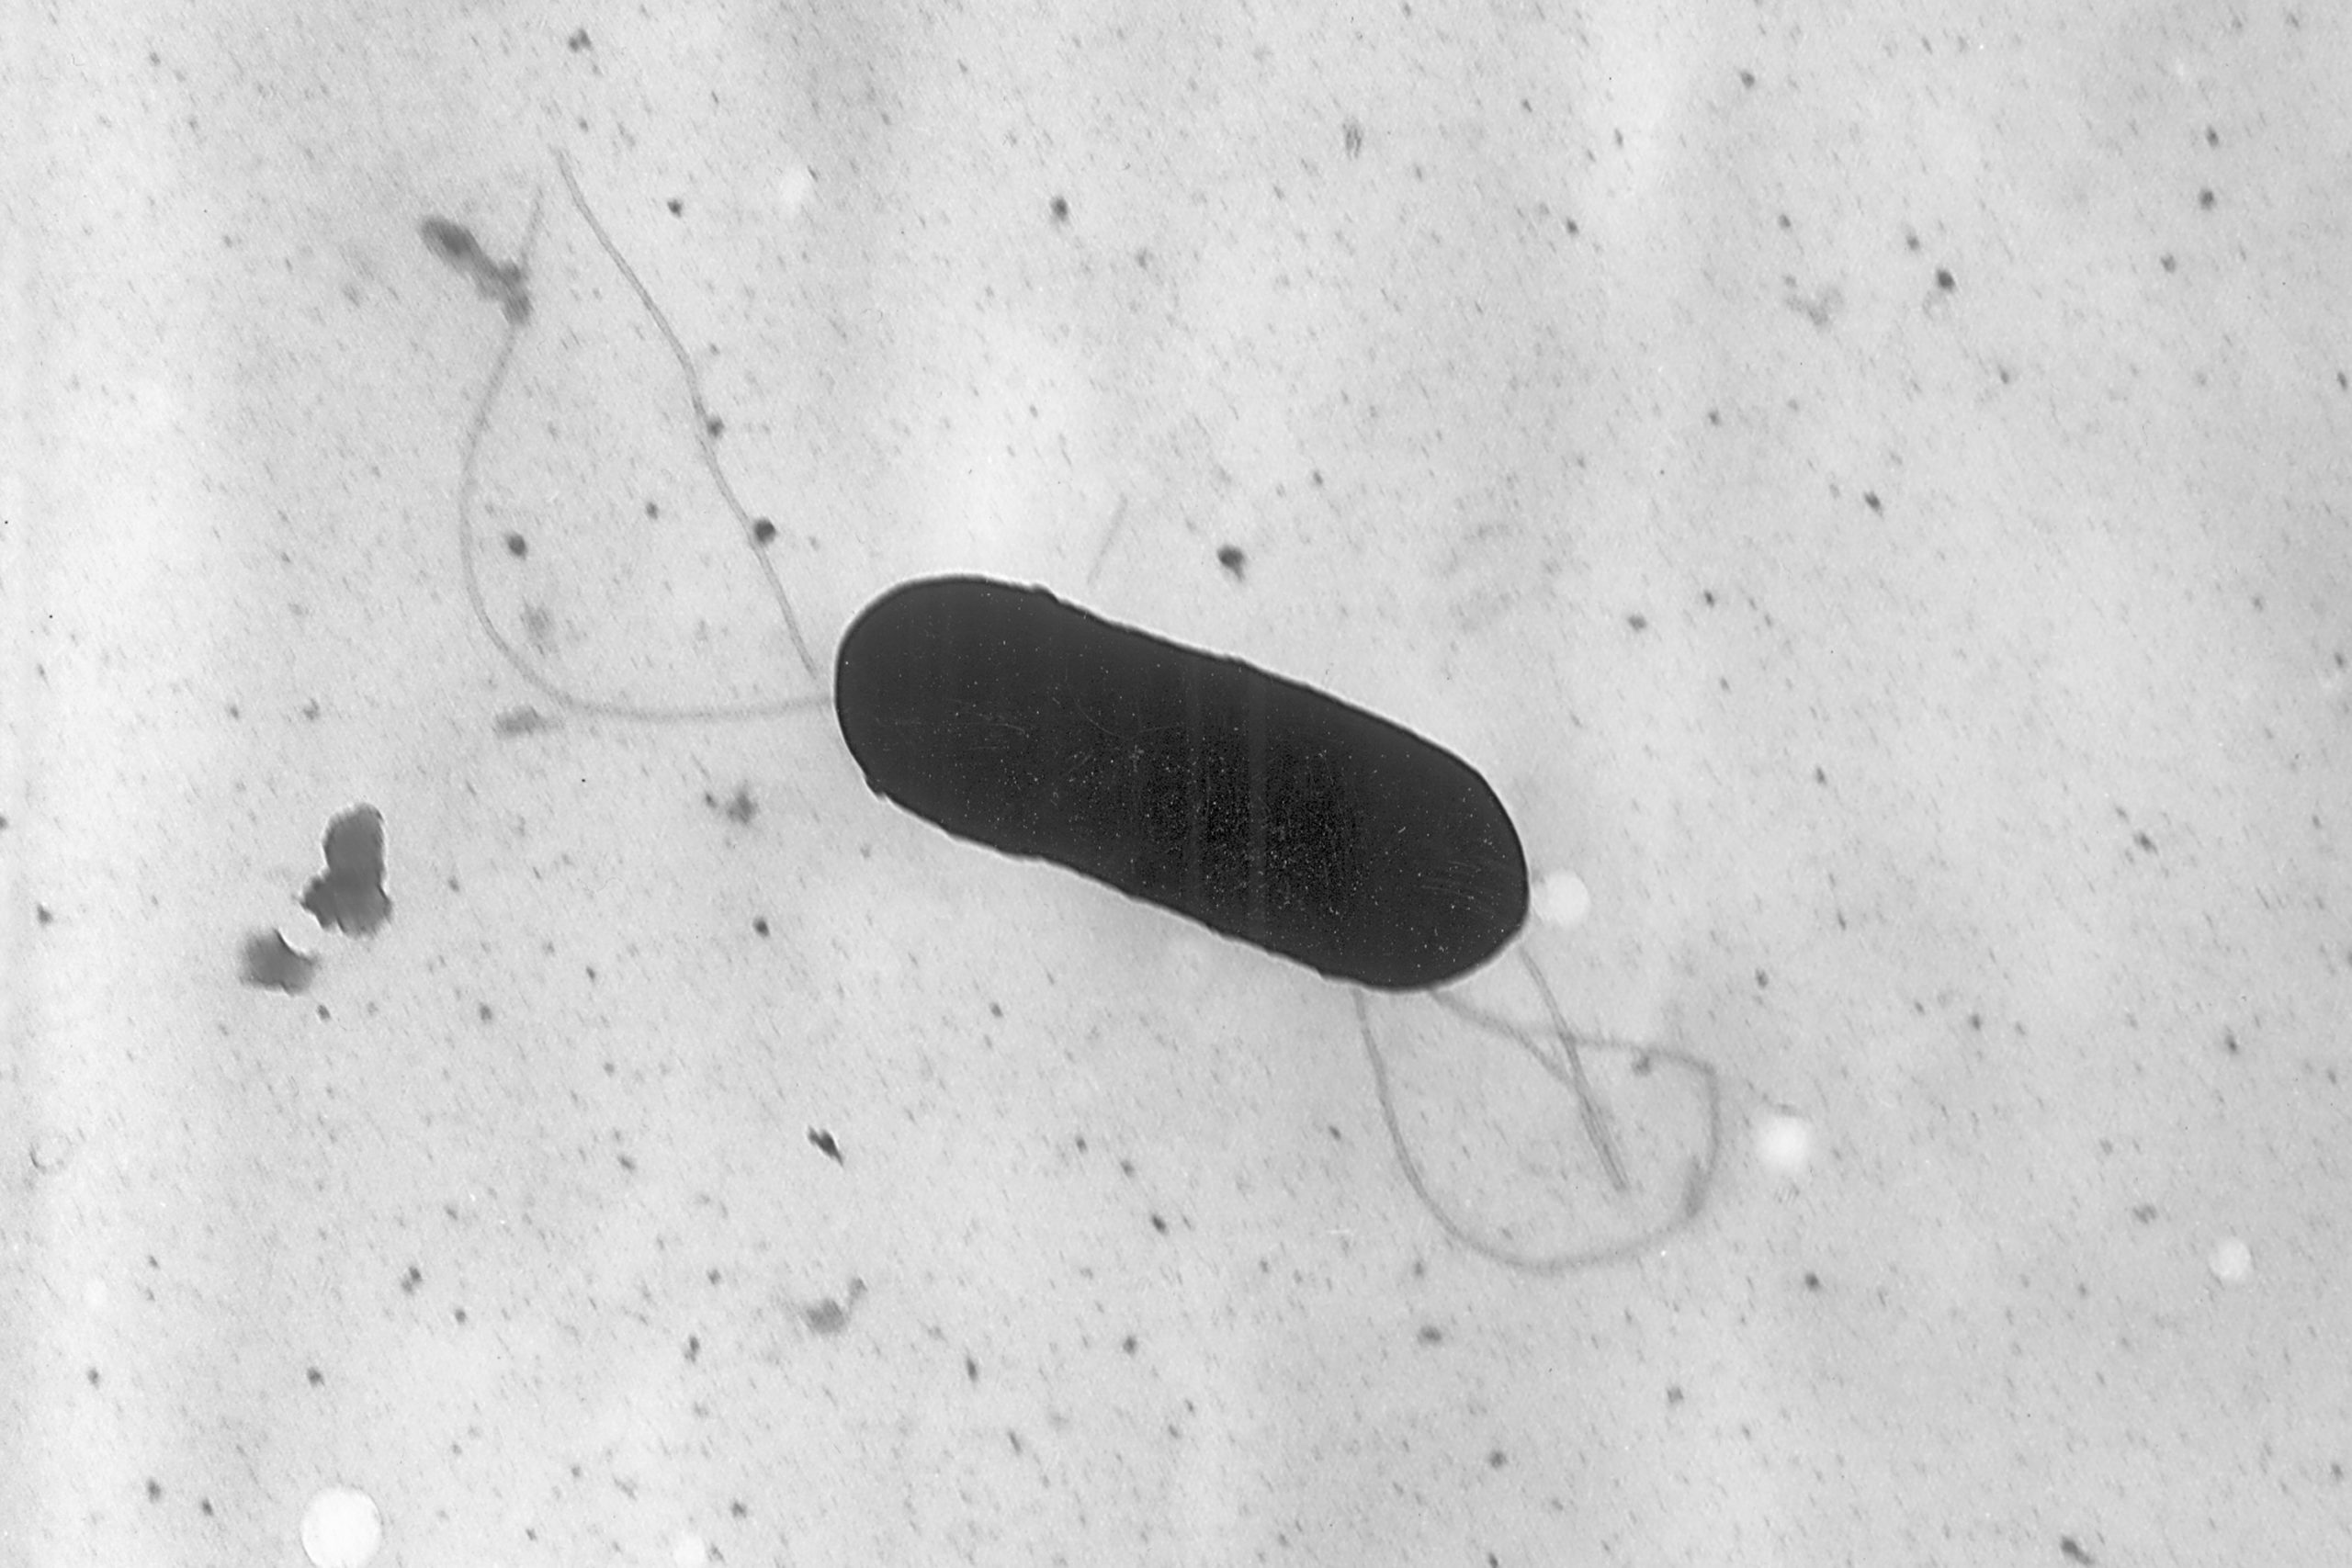 A Listeria monocytogenes bacterium is pictured in a 2002 electron microscope image.